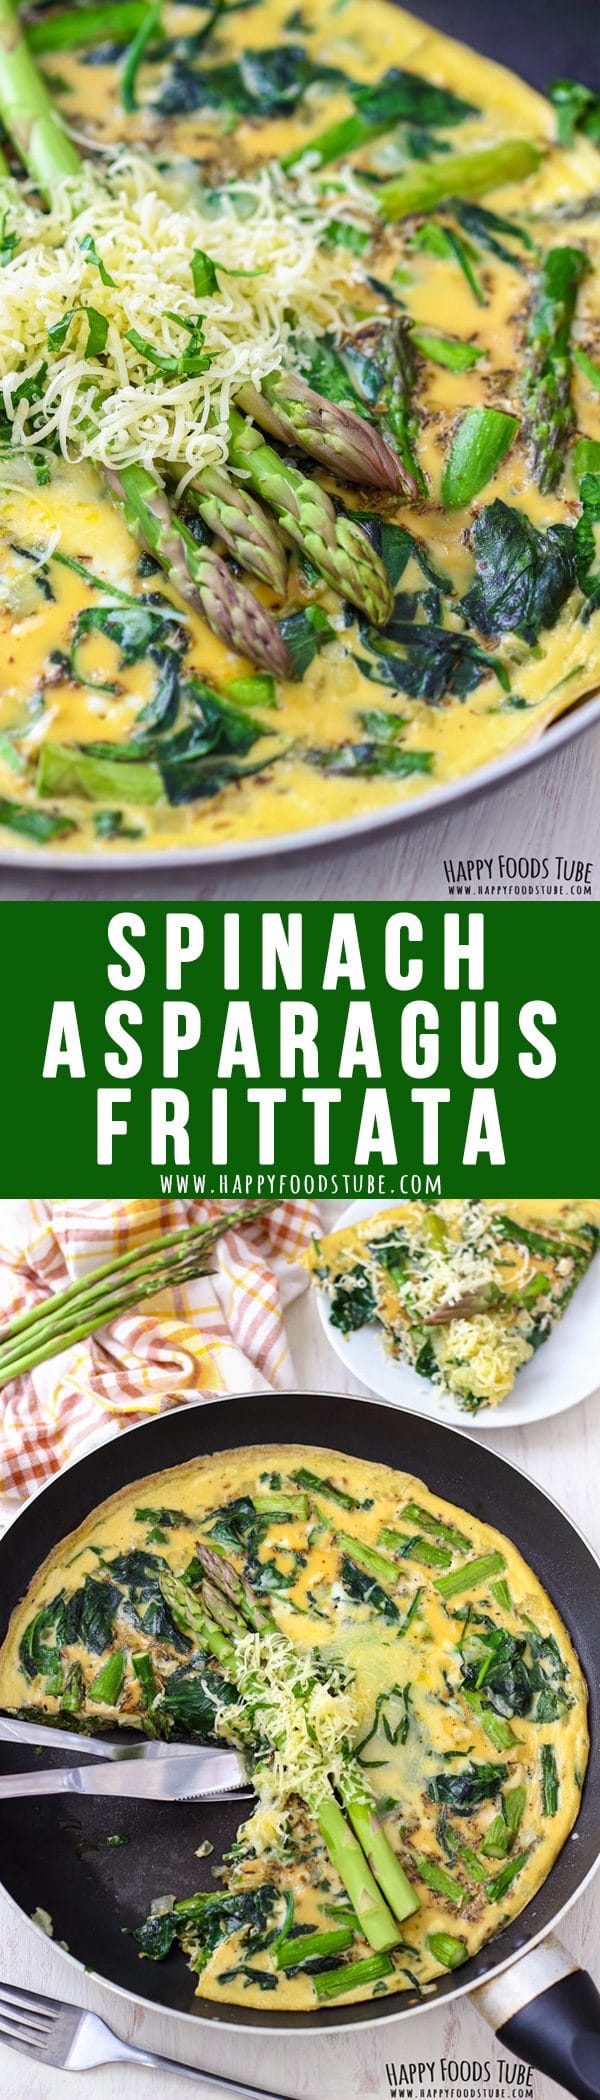 Spinach and Asparagus Frittata Collage Picture